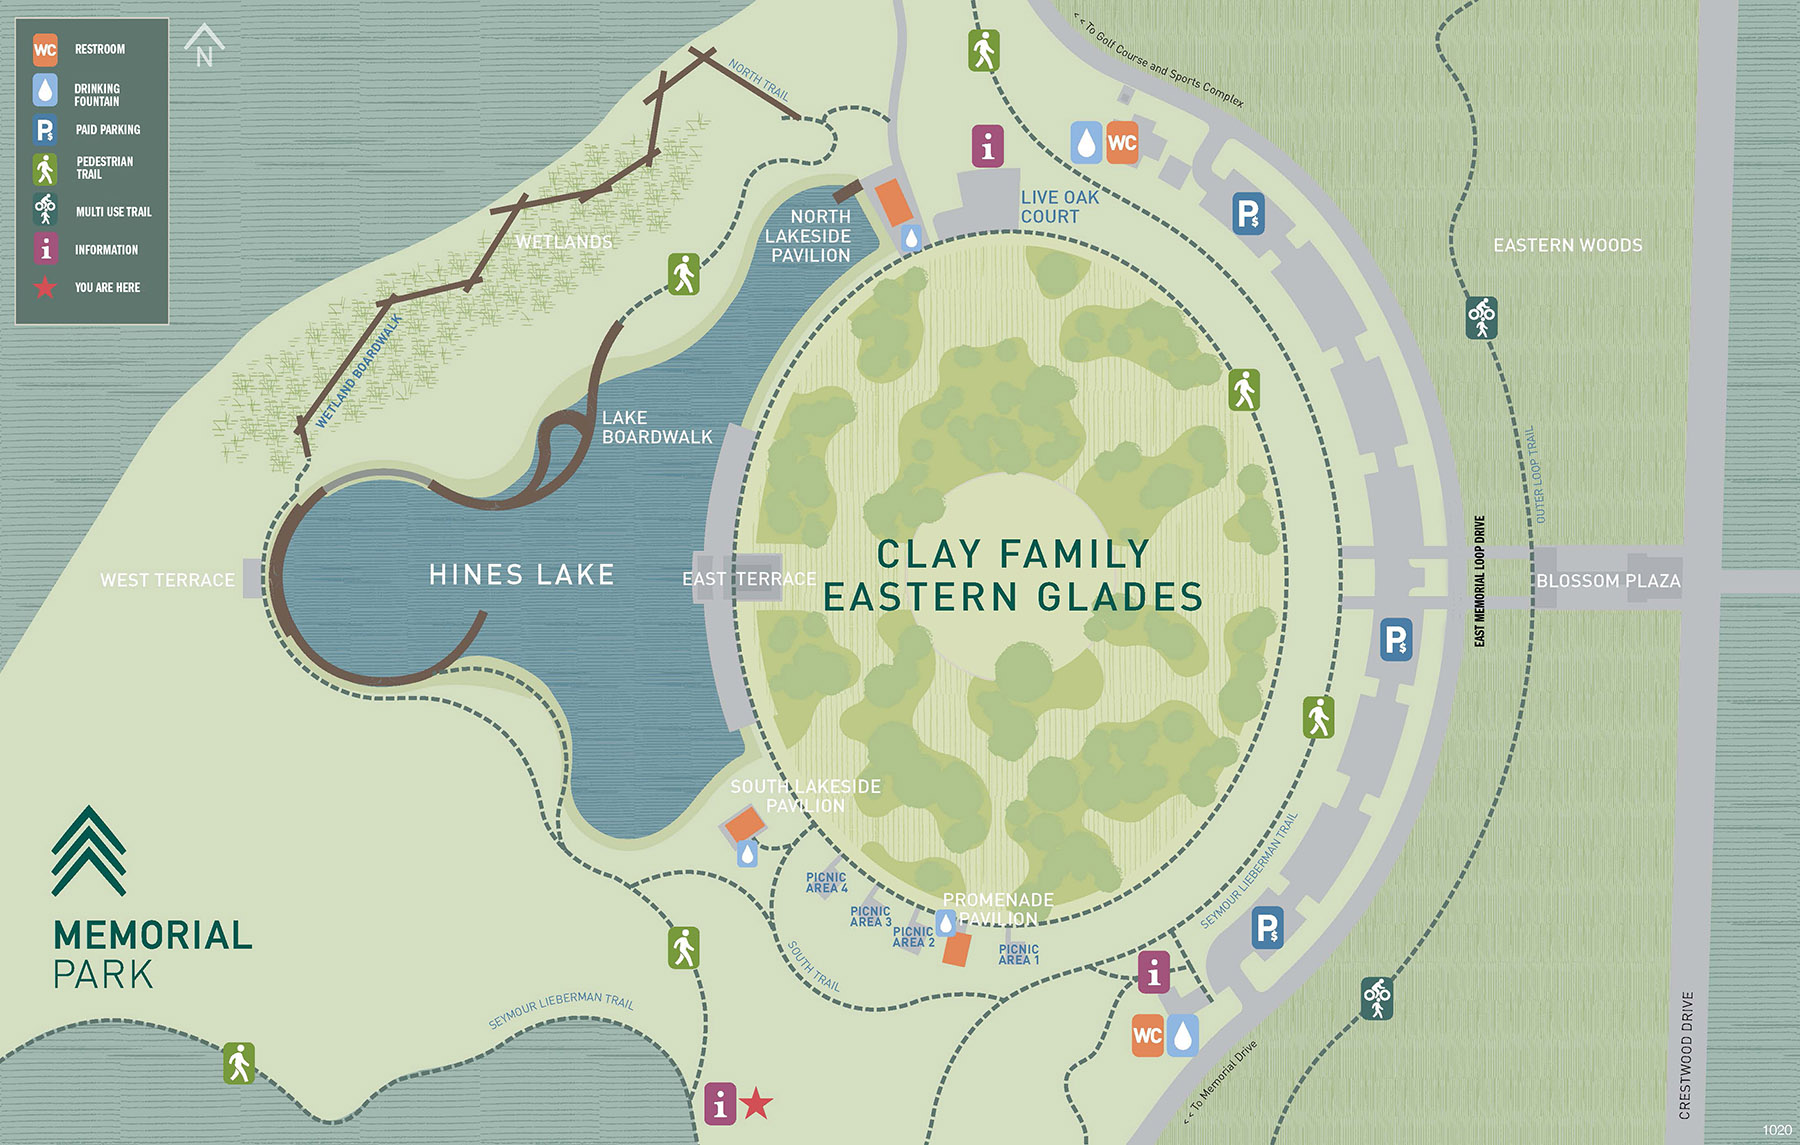 map of the eastern glades showing the lake, greenspaces, pavilion and boardwalk